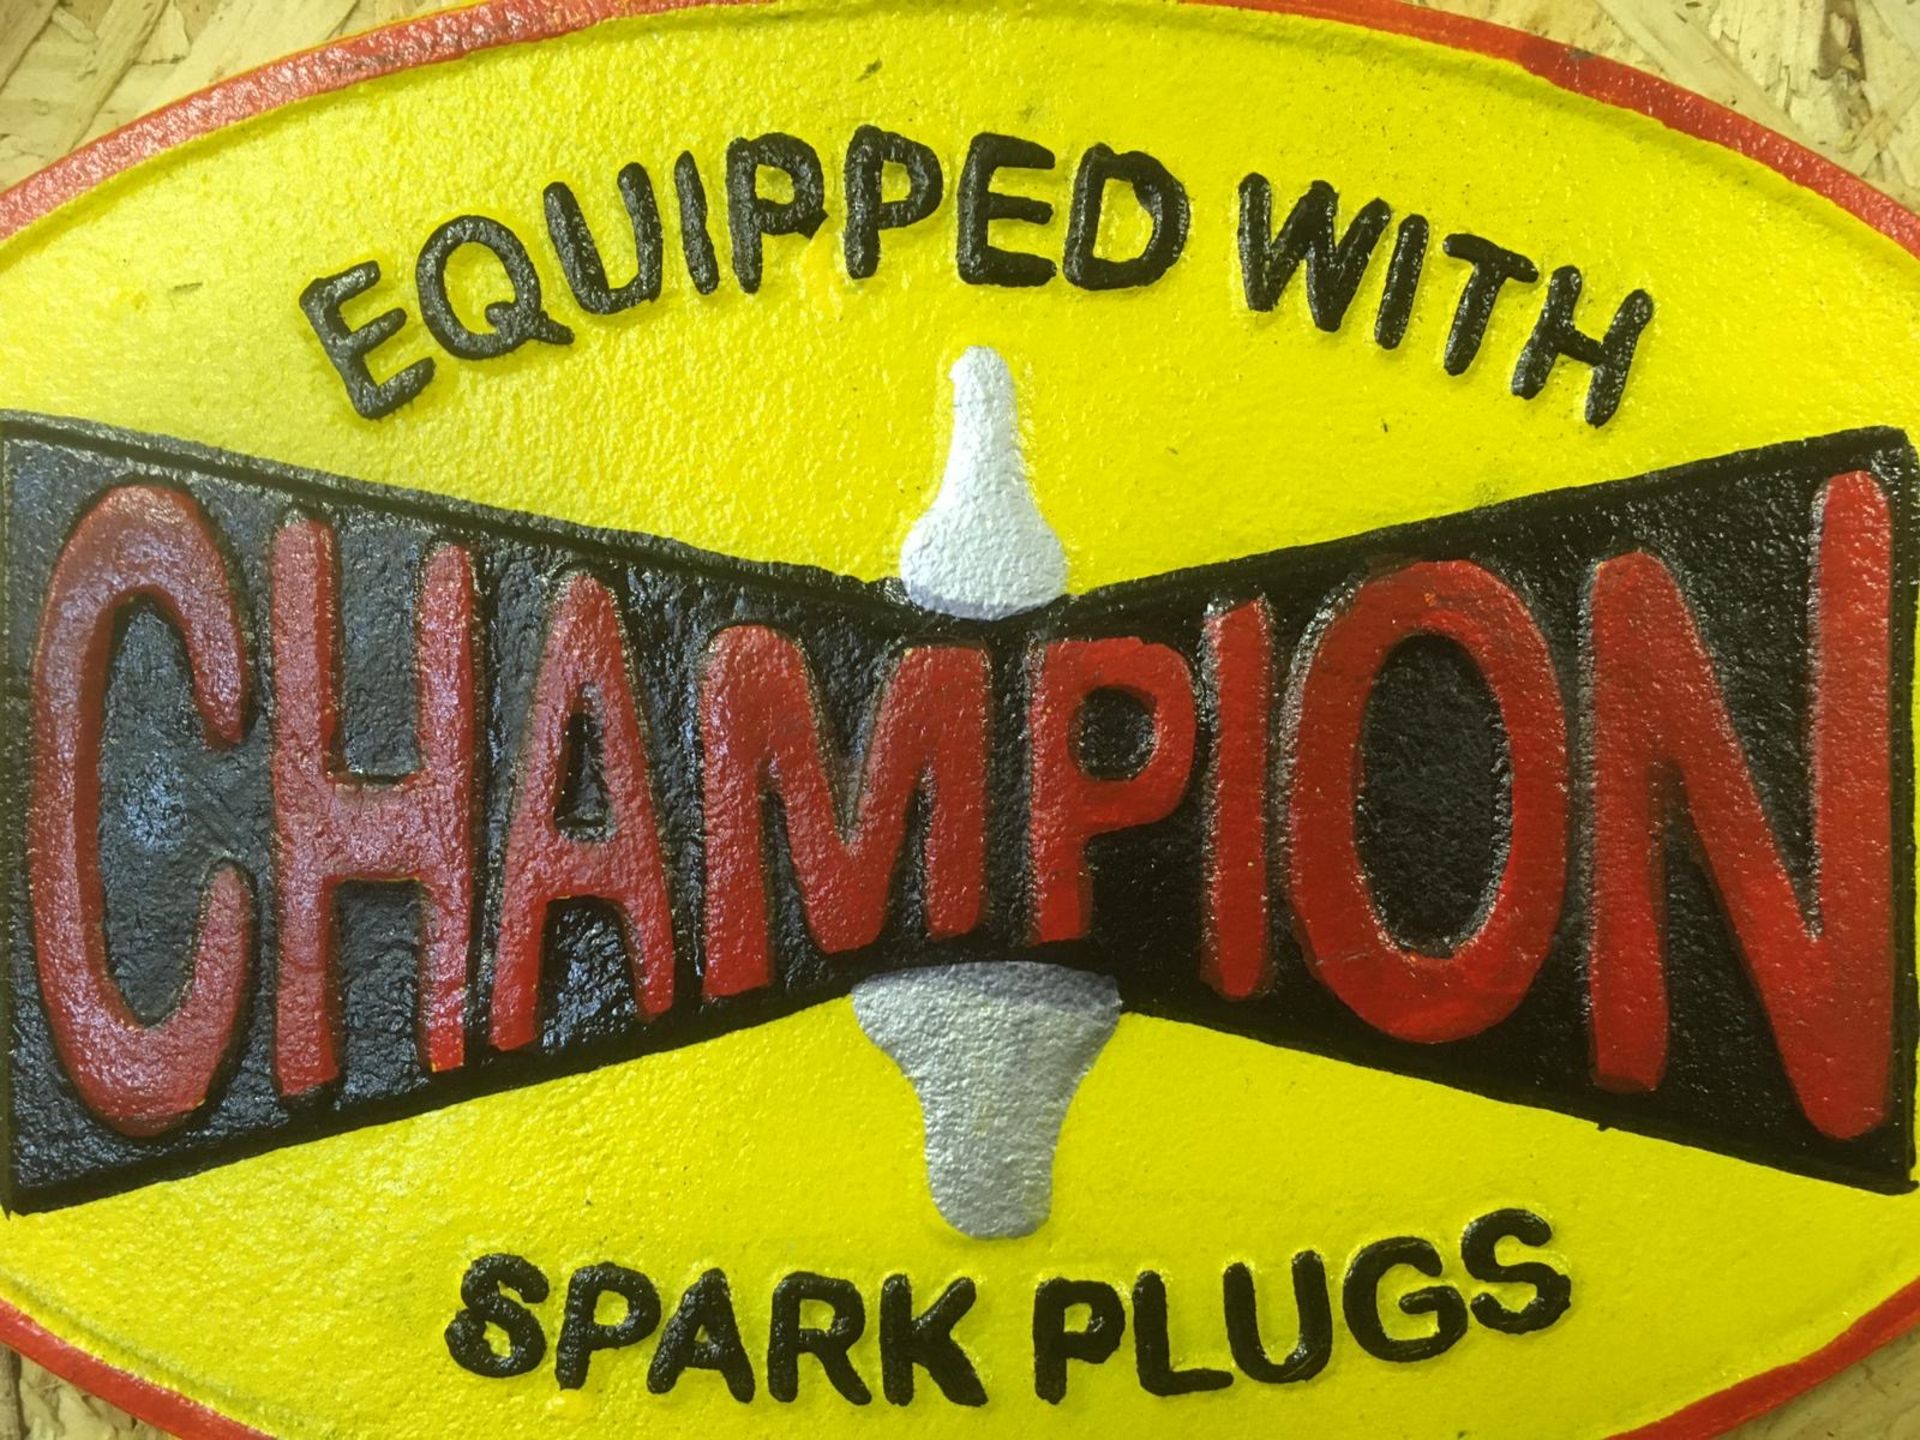 Champion 'Spark Plugs' Wall Plaque - Image 2 of 2